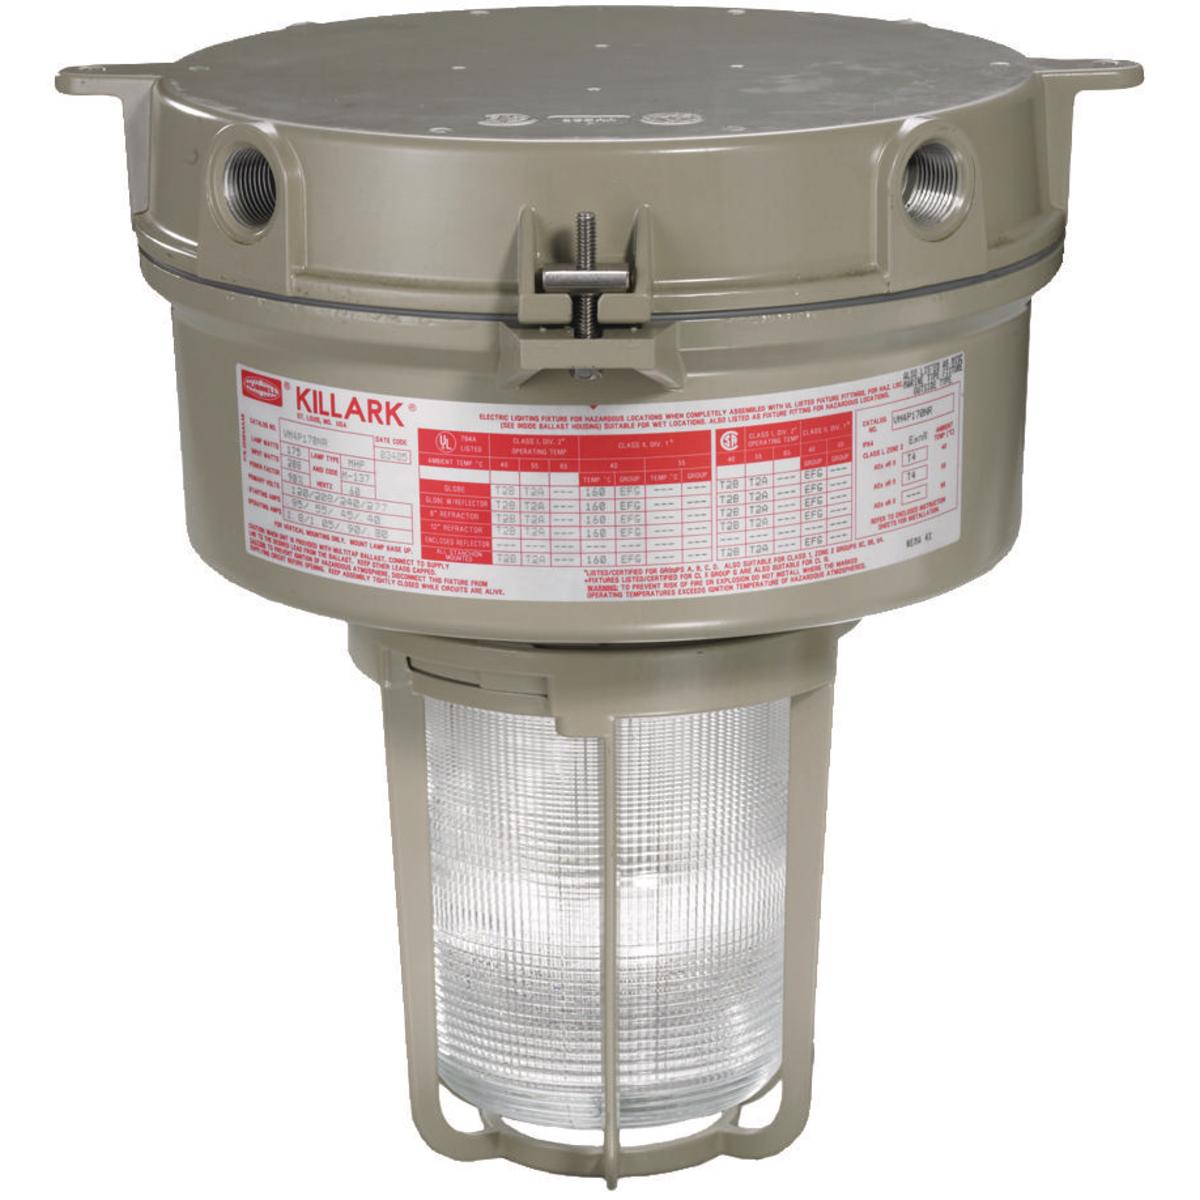 Hubbell VE3Q2626E30X2R5G VE3 26W Normal/Emergency,120-277V, 3/4" Ceiling Mount, Type V Glass Refractor with Guard  ; Quad-Pin triple-tube long-life compact fluorescent lamps included ; World Voltage 120-277VAC 50-60 Hz ; LED charging indicator light visible through lens ; Prewire